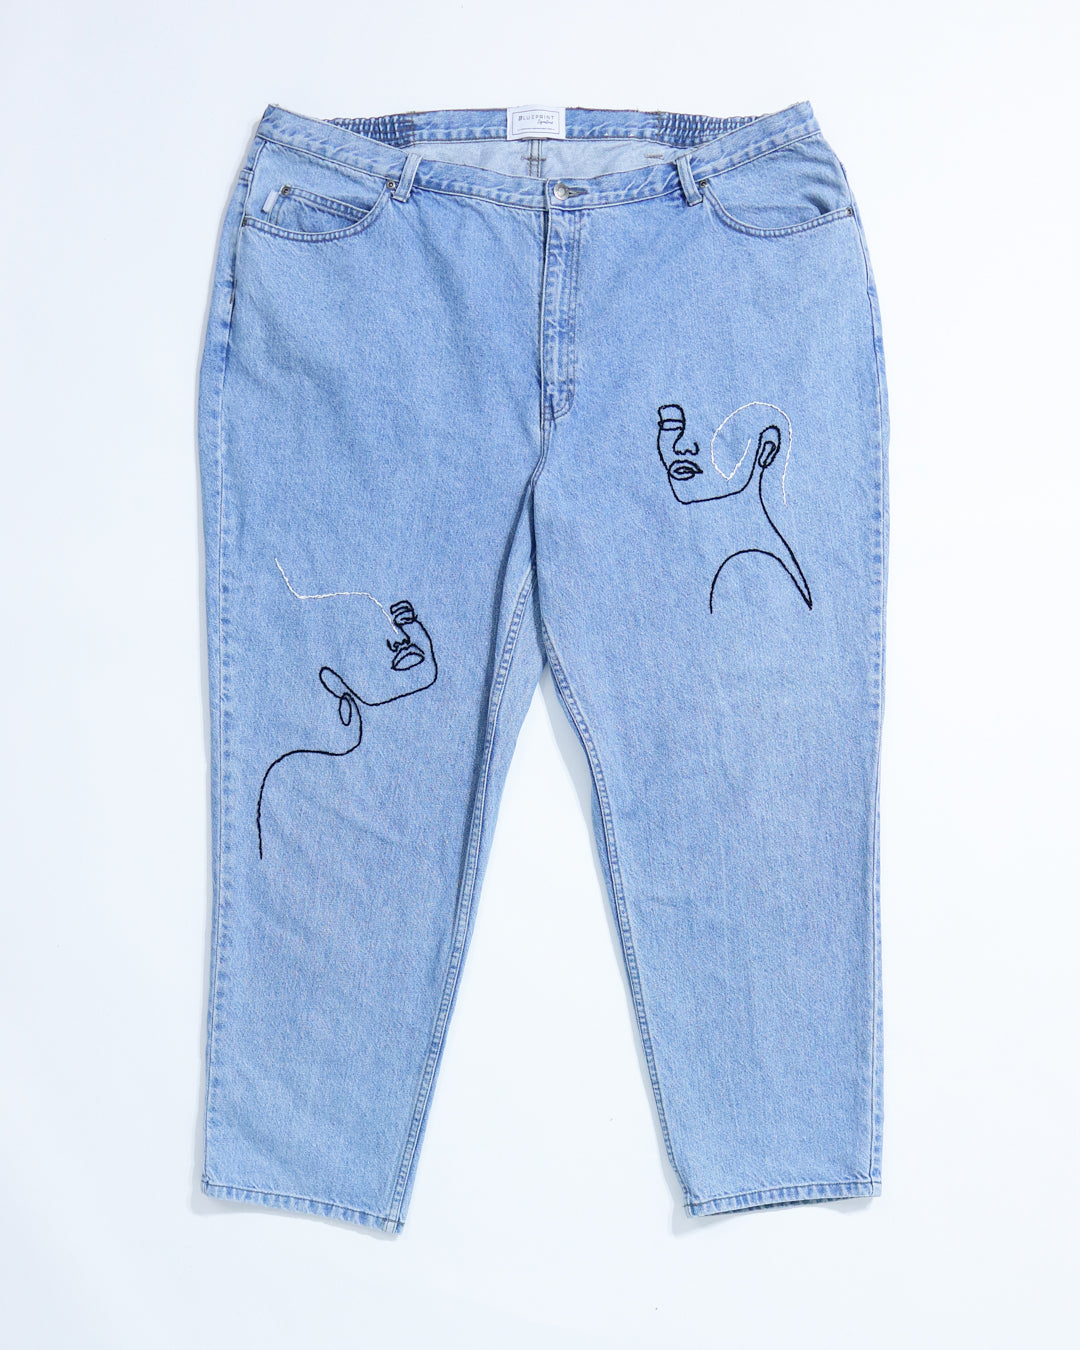 Embroidery Jeans (Size 24)